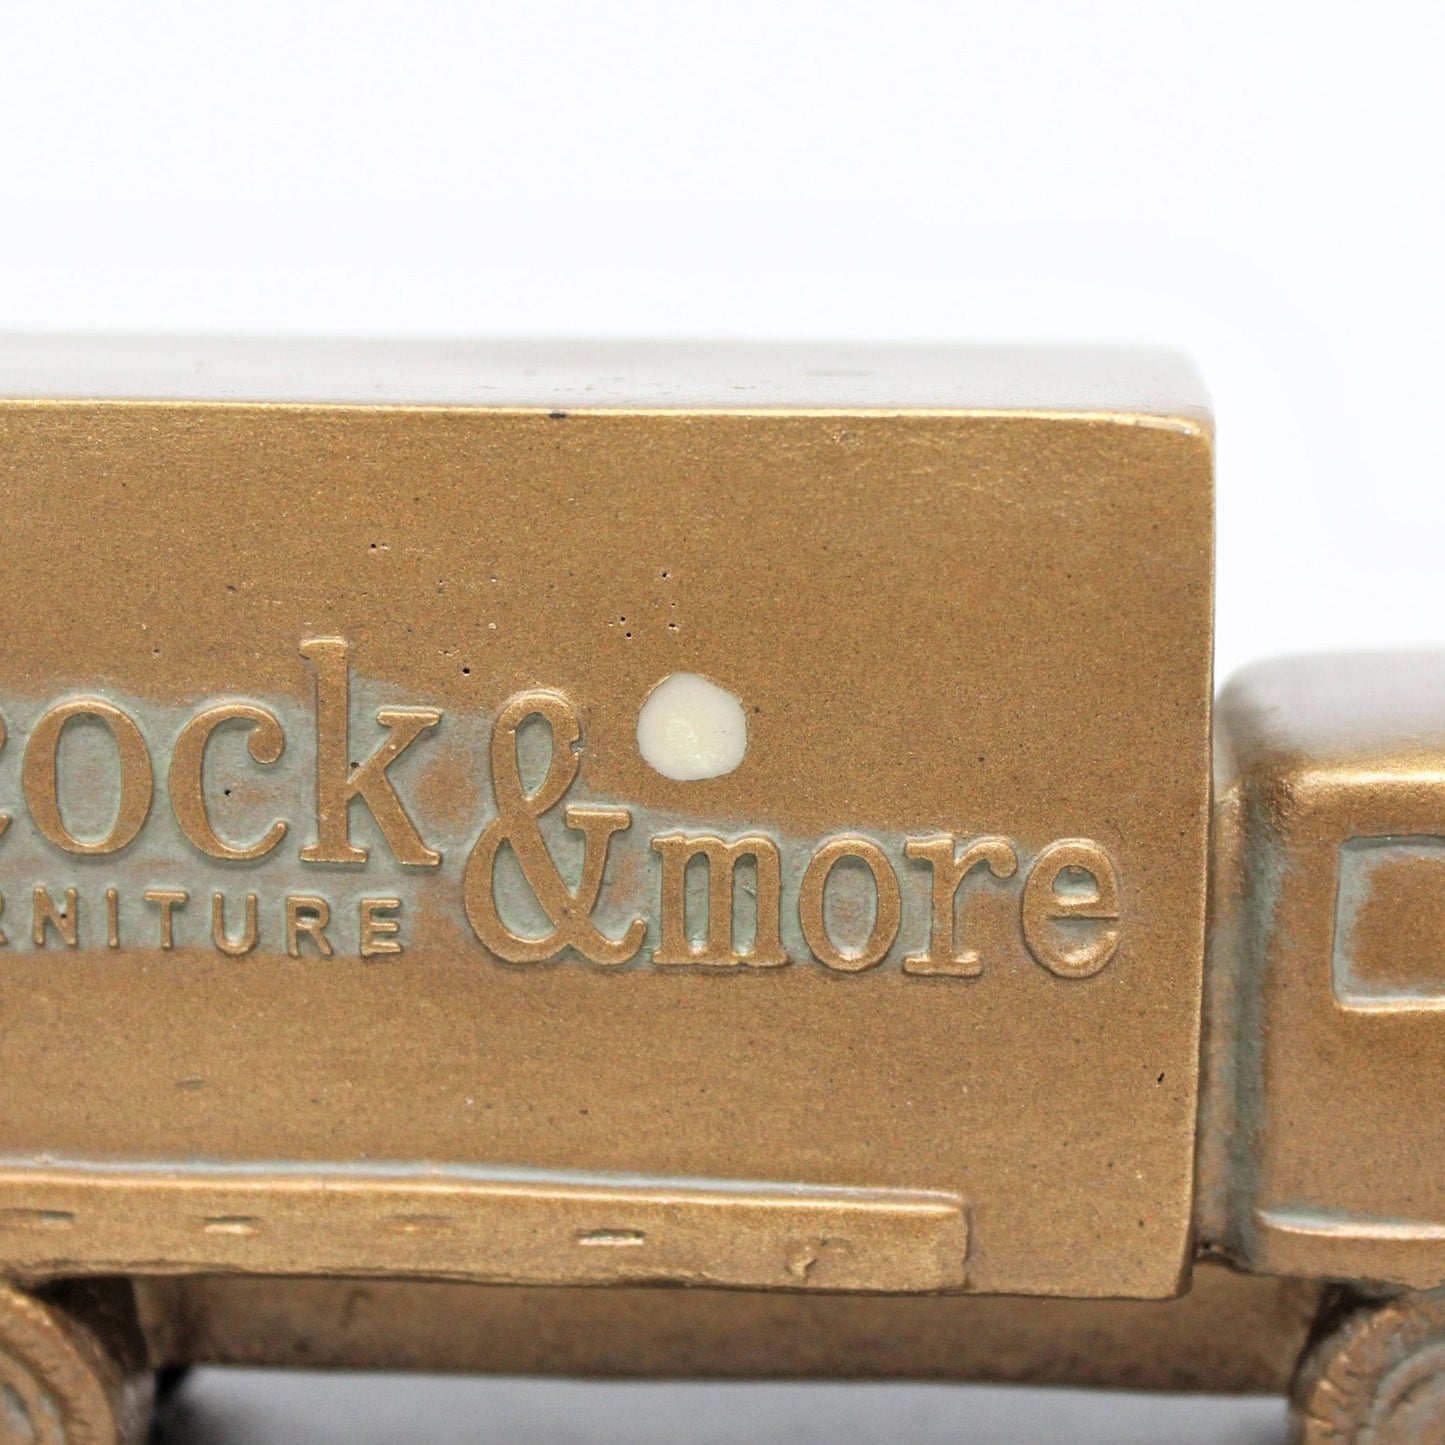 Figurine, Badcock Furniture Delivery Truck, 100th Anniversary, Collectible Advertising